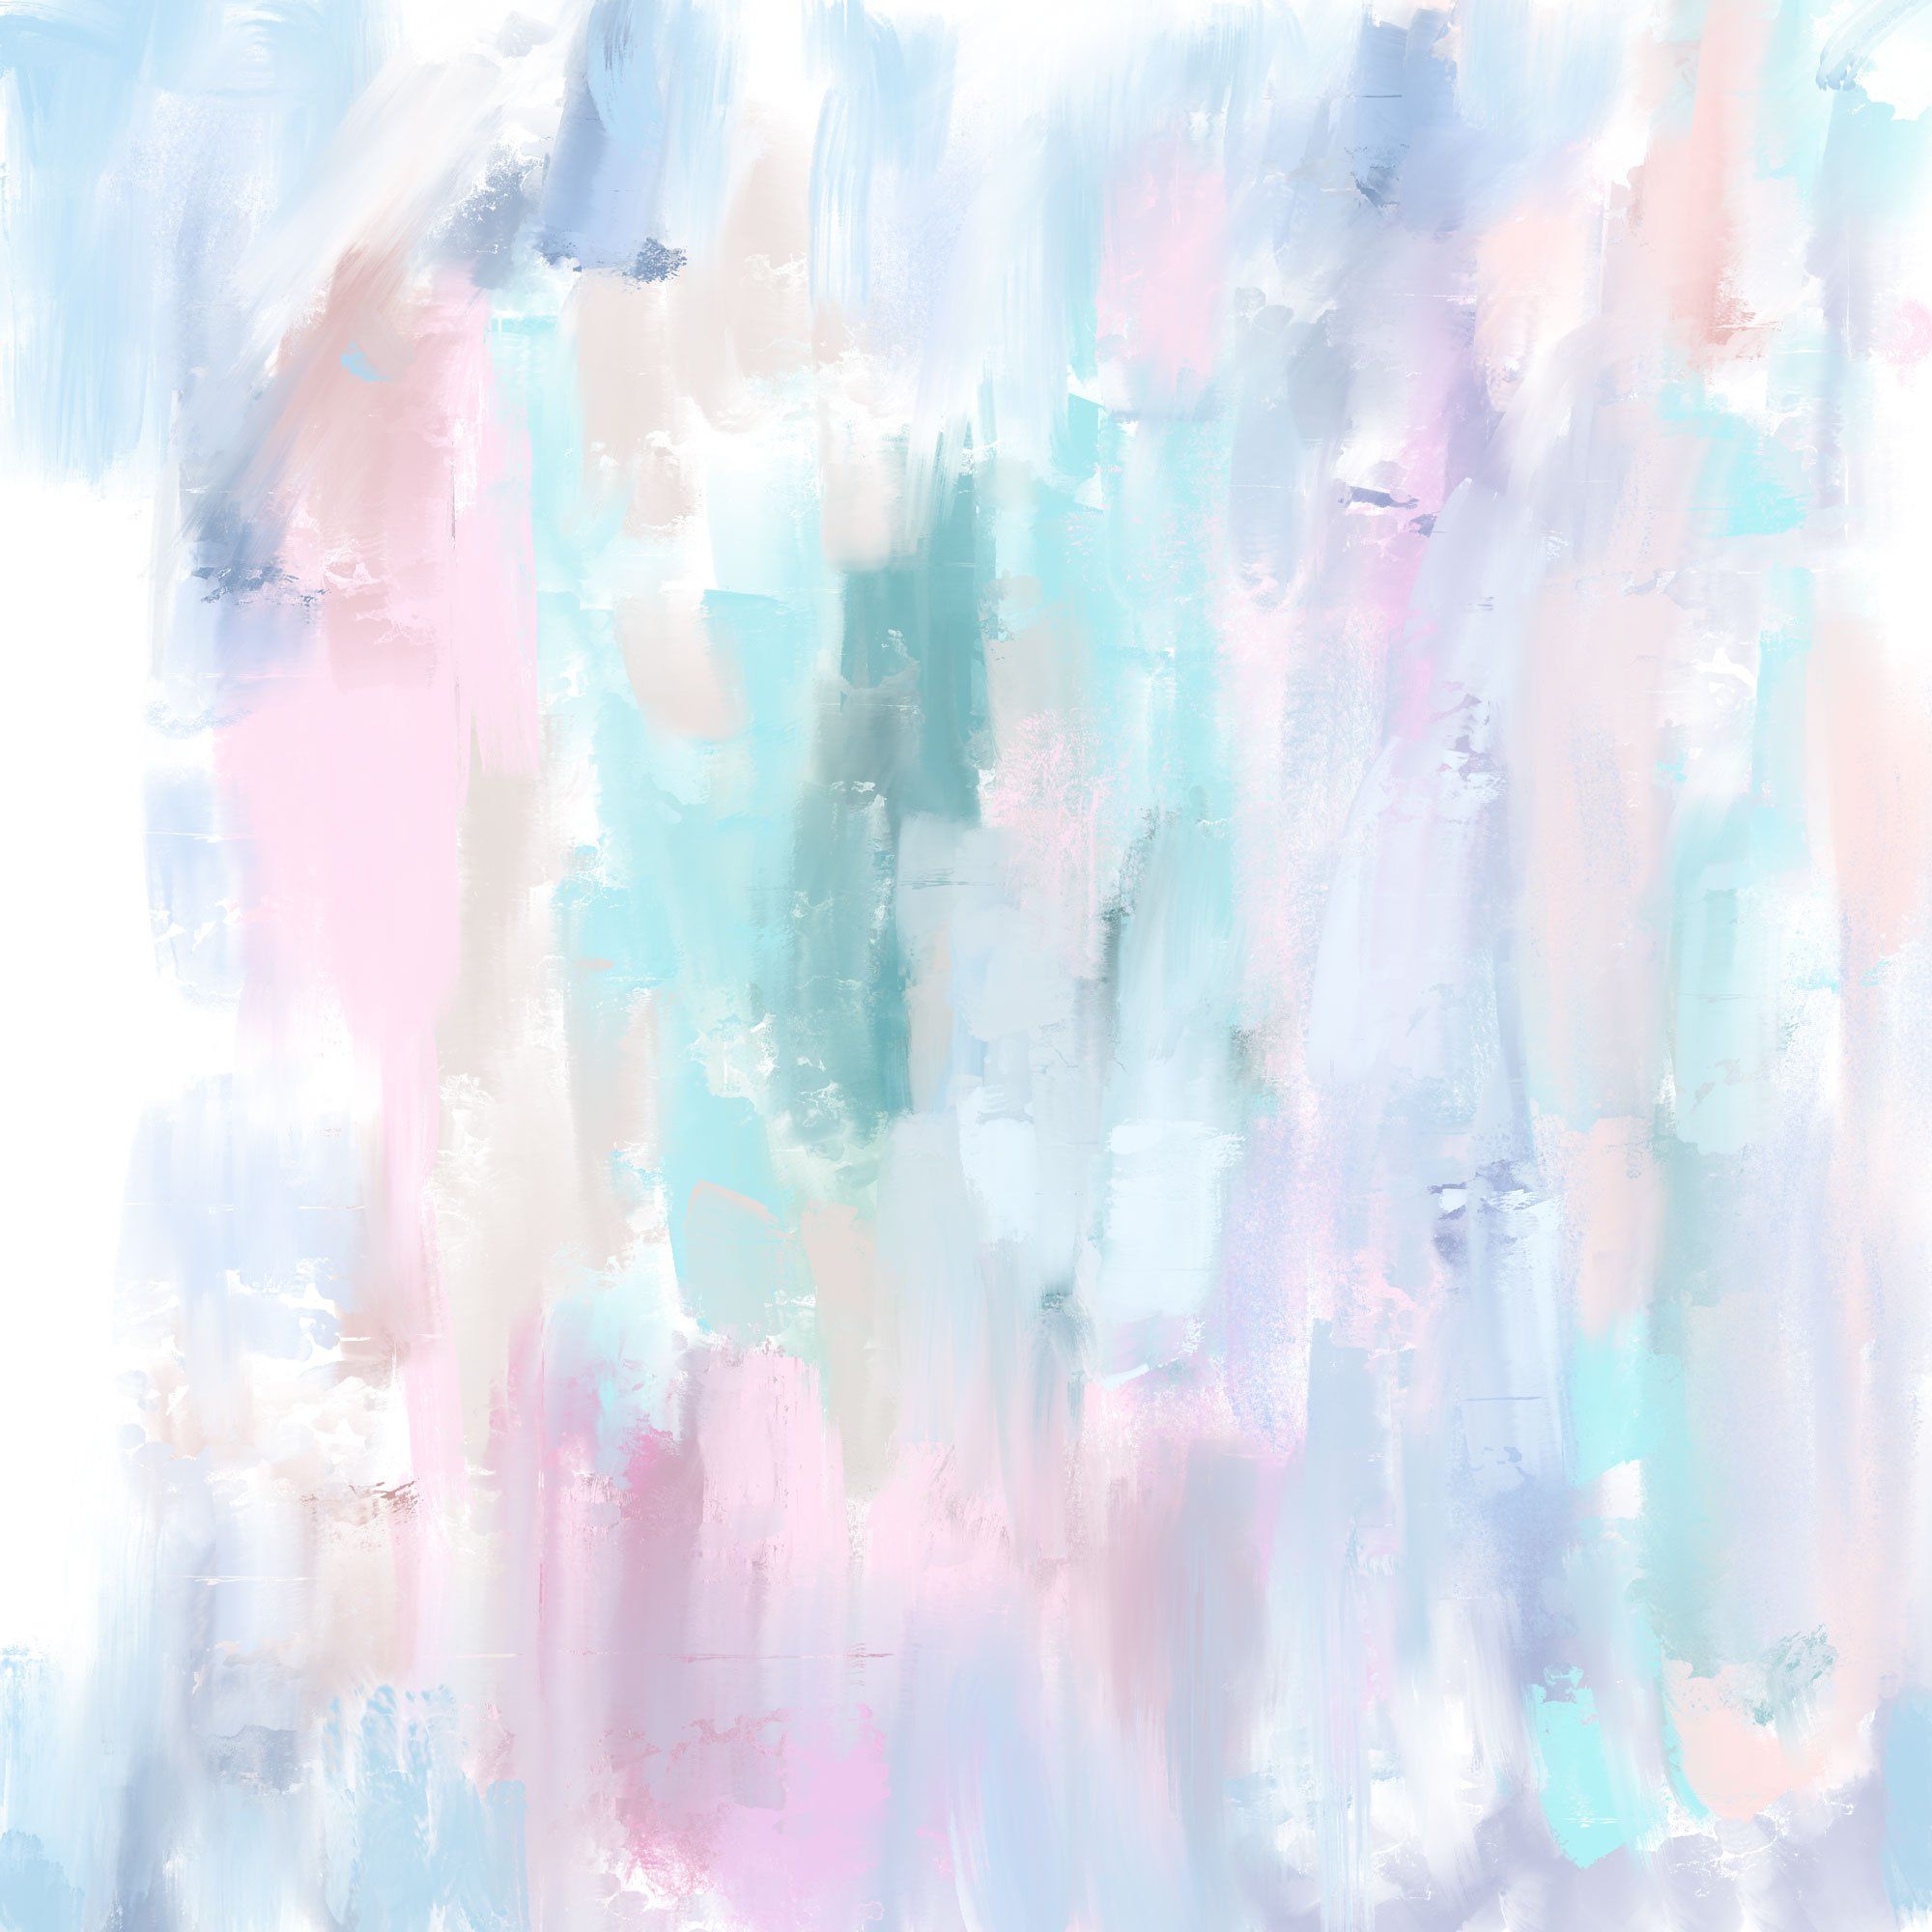 Pastel oil painting background. Oil painting background, Oil painting, Art background